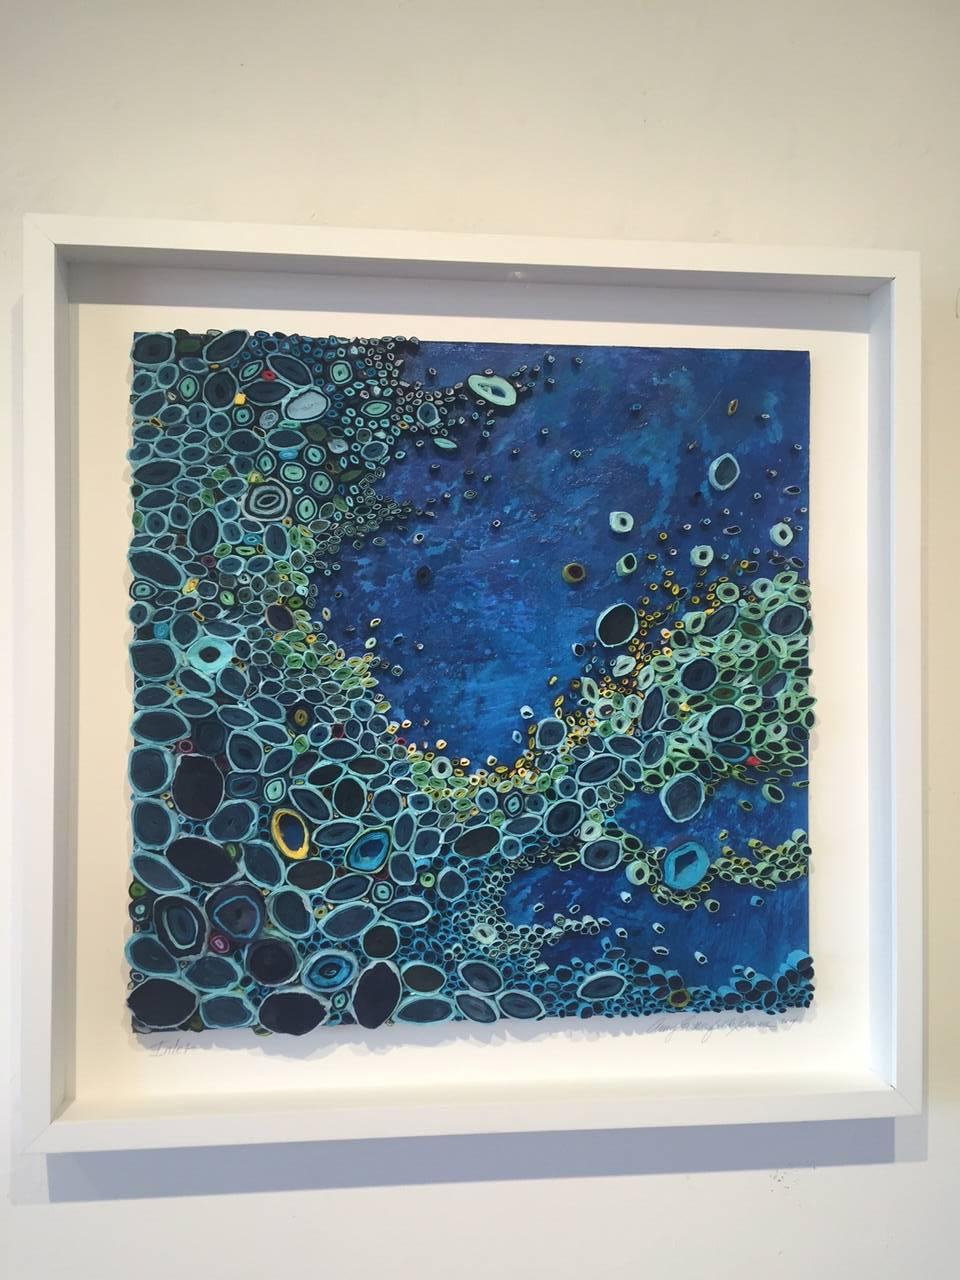 Mixed Media artist Amy Genser makes dimensional paper collages. These colorful, textural, one-of-a-kind wall pieces embody movement and processes. She masterfully manipulates paper -- each piece being cut, rolled and stacked -- to mimic organic